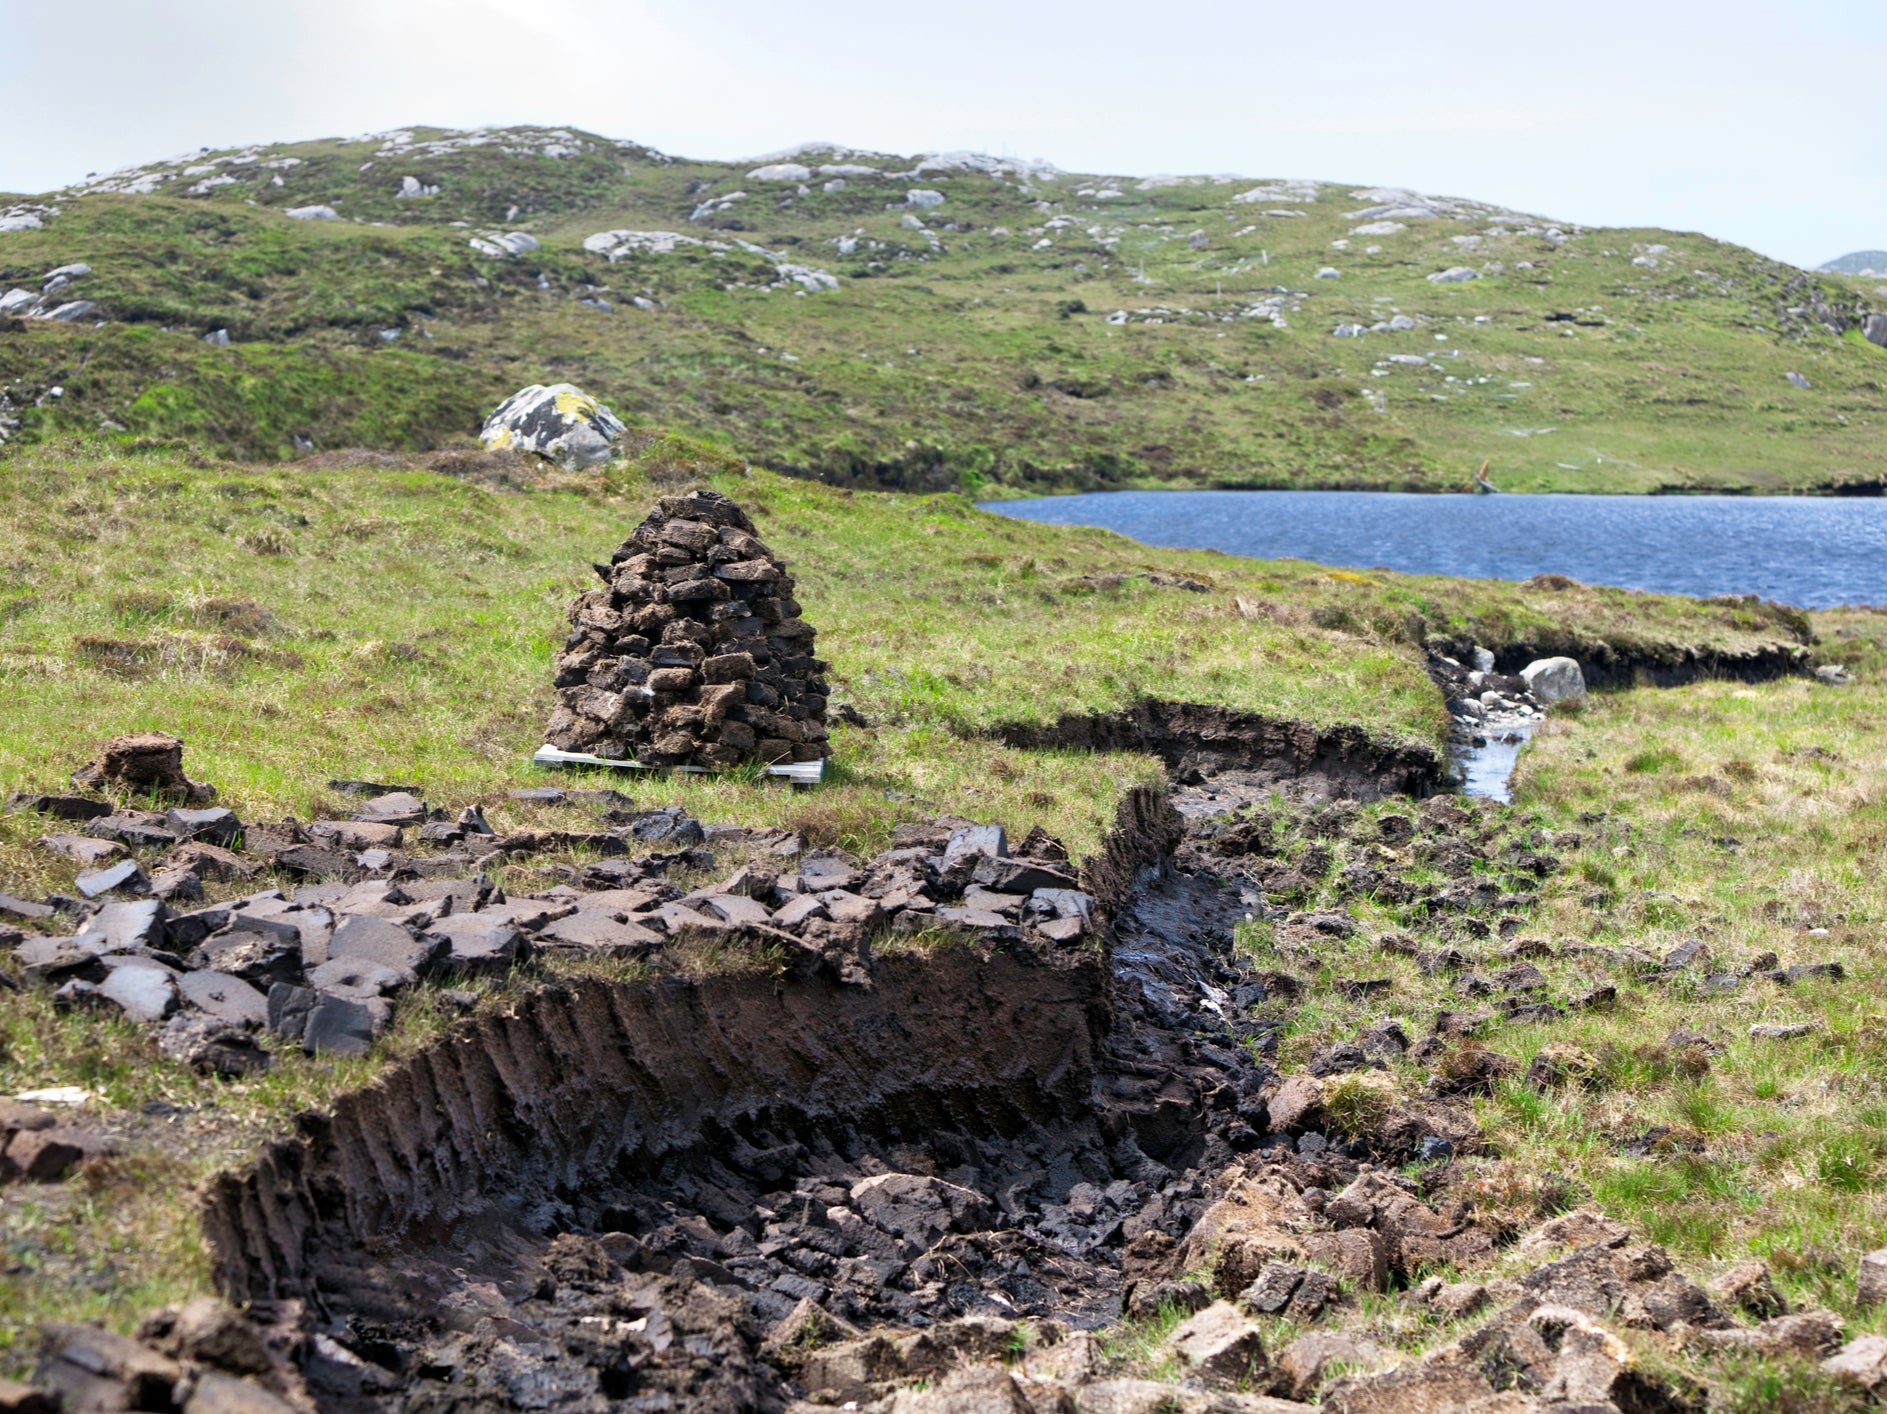 Peat being cut from the land on the Isle of Harris in Scotland’s Outer Hebrides